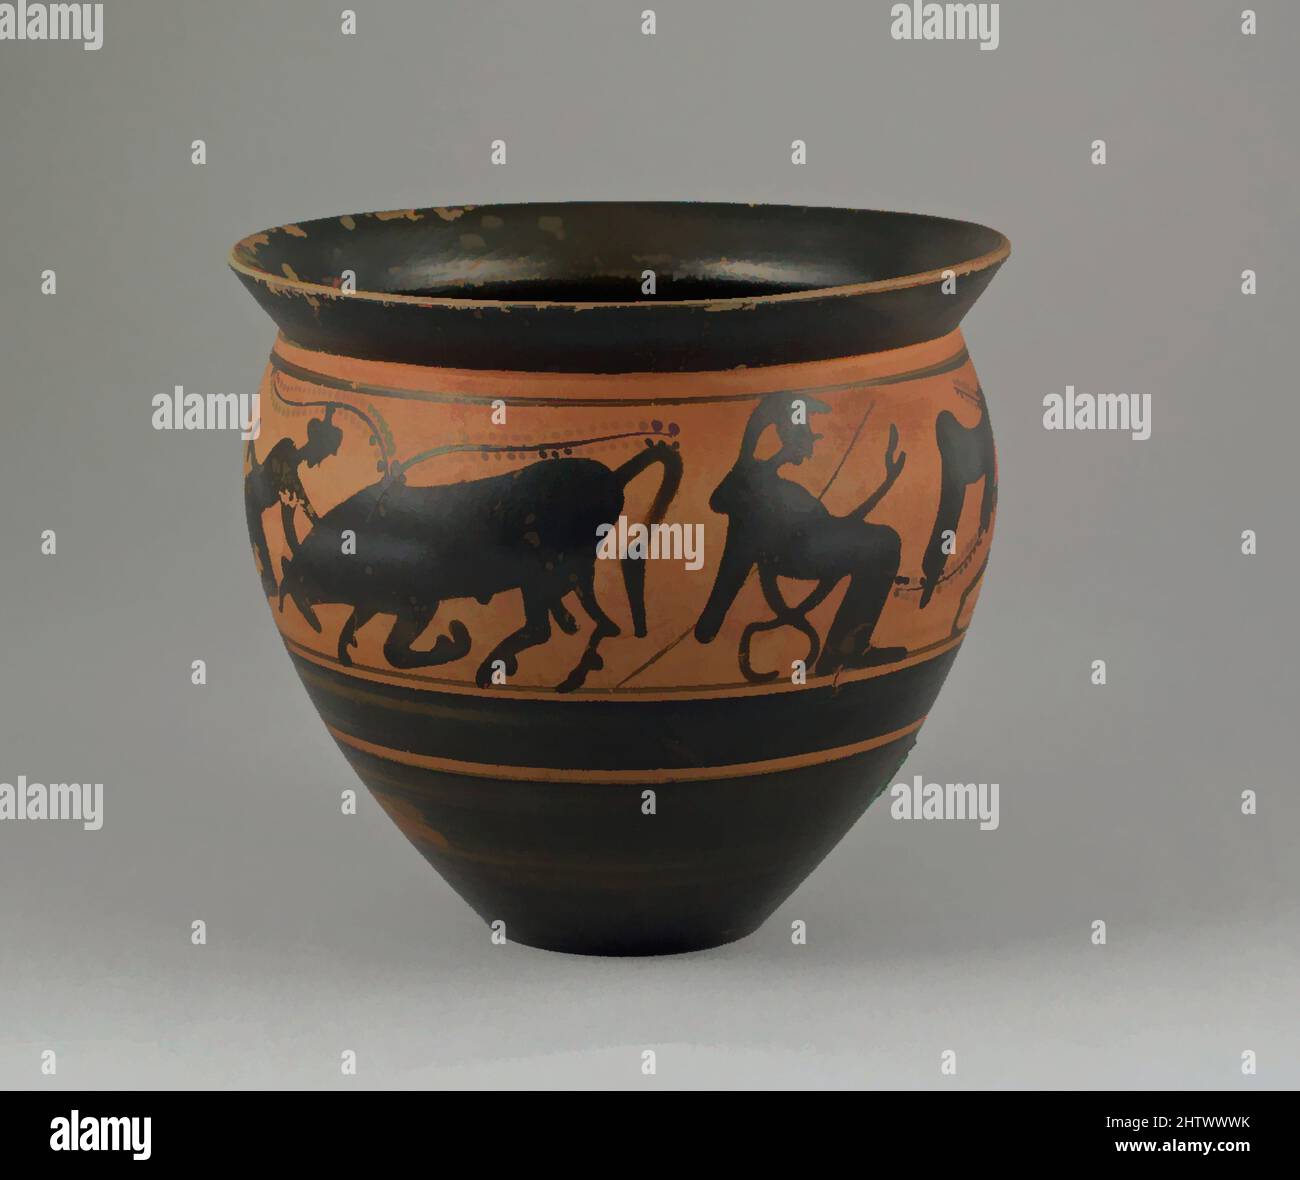 Art inspired by Mastoid, Archaic, ca. 500–490 B.C., Greek, Attic, Terracotta; black-figure, Diameter: 3 9/16 × 3 3/4 × 1 7/16 in. (9.1 × 9.5 × 3.7 cm), Vases, Classic works modernized by Artotop with a splash of modernity. Shapes, color and value, eye-catching visual impact on art. Emotions through freedom of artworks in a contemporary way. A timeless message pursuing a wildly creative new direction. Artists turning to the digital medium and creating the Artotop NFT Stock Photo